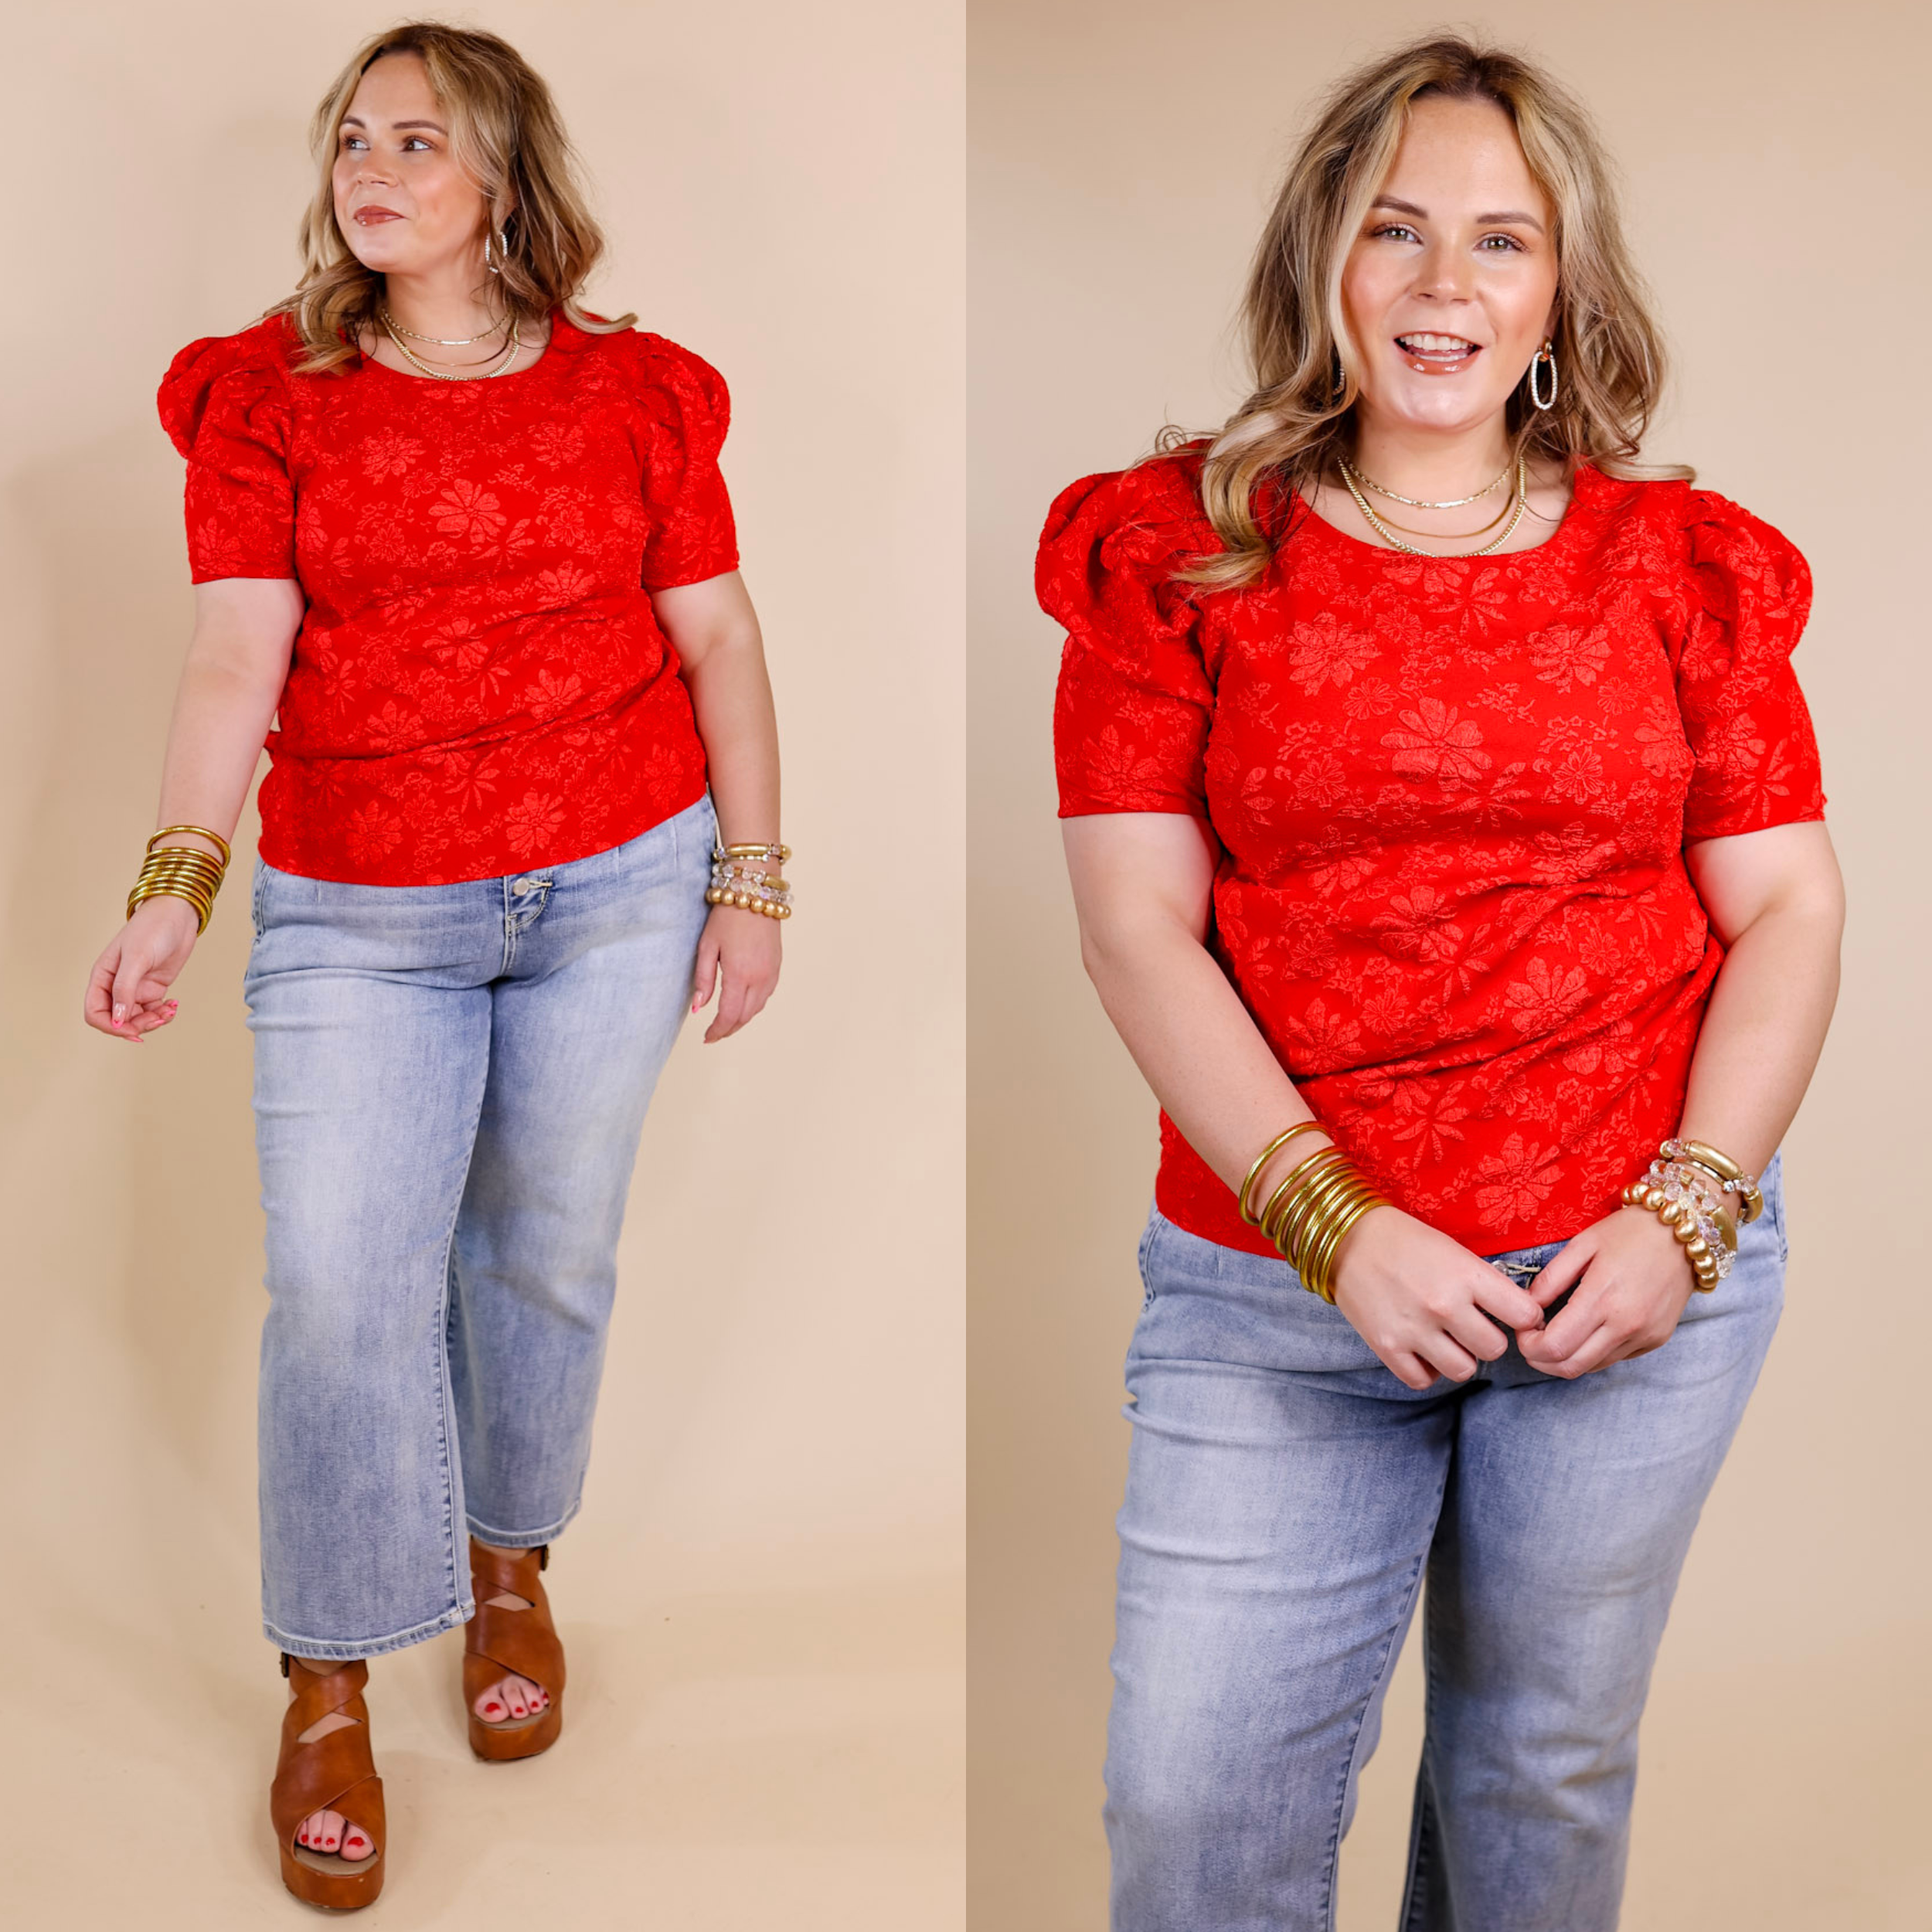 Model is wearing a floral embossed top with short puff sleeves in a bright red color. Model has it paired with light wash jeans, tan sandals, and gold jewelry.